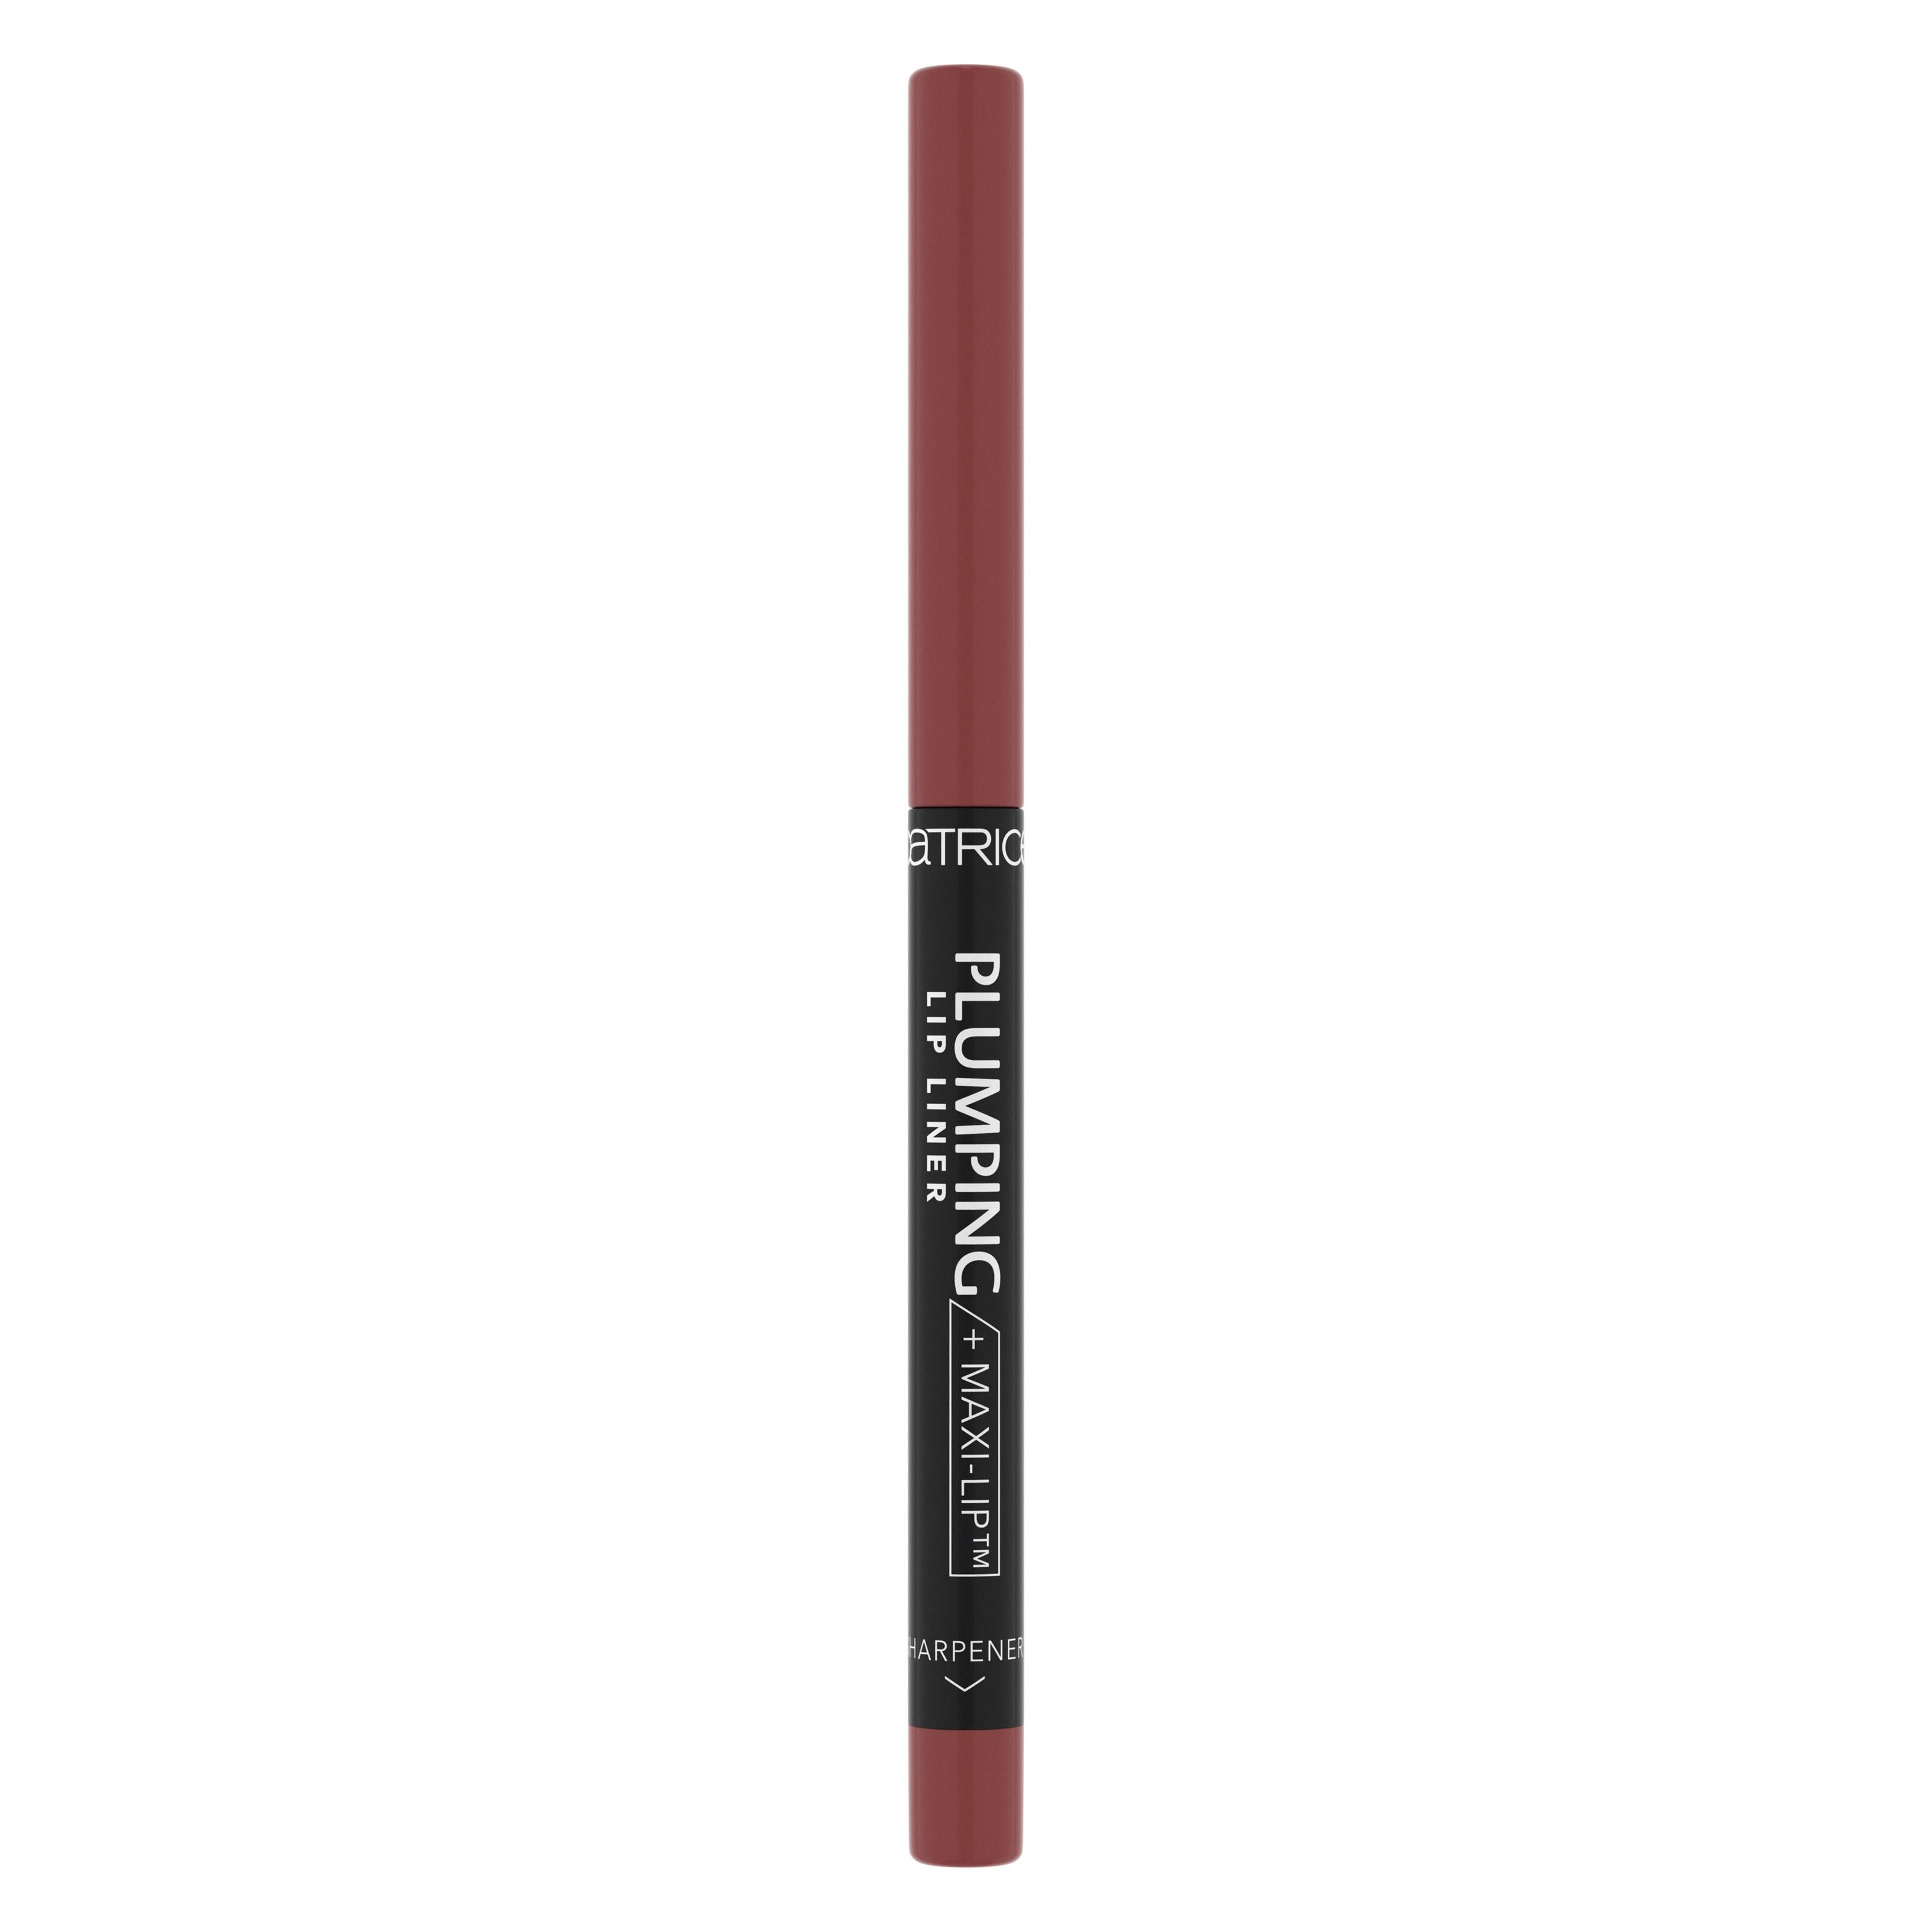 Catrice Plumping Lip Liner 040 Starring Role 0.35g